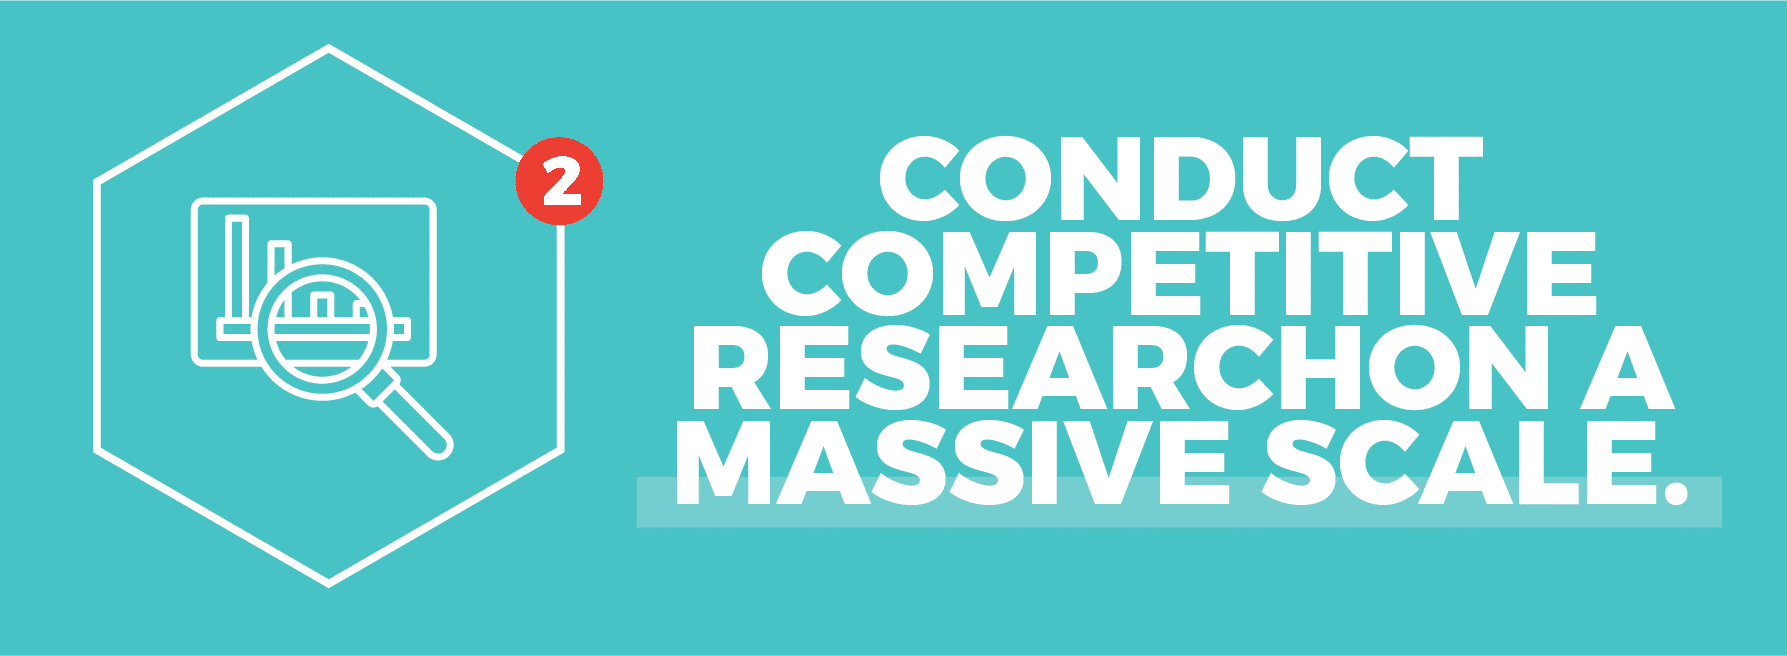 Conduct competitive research